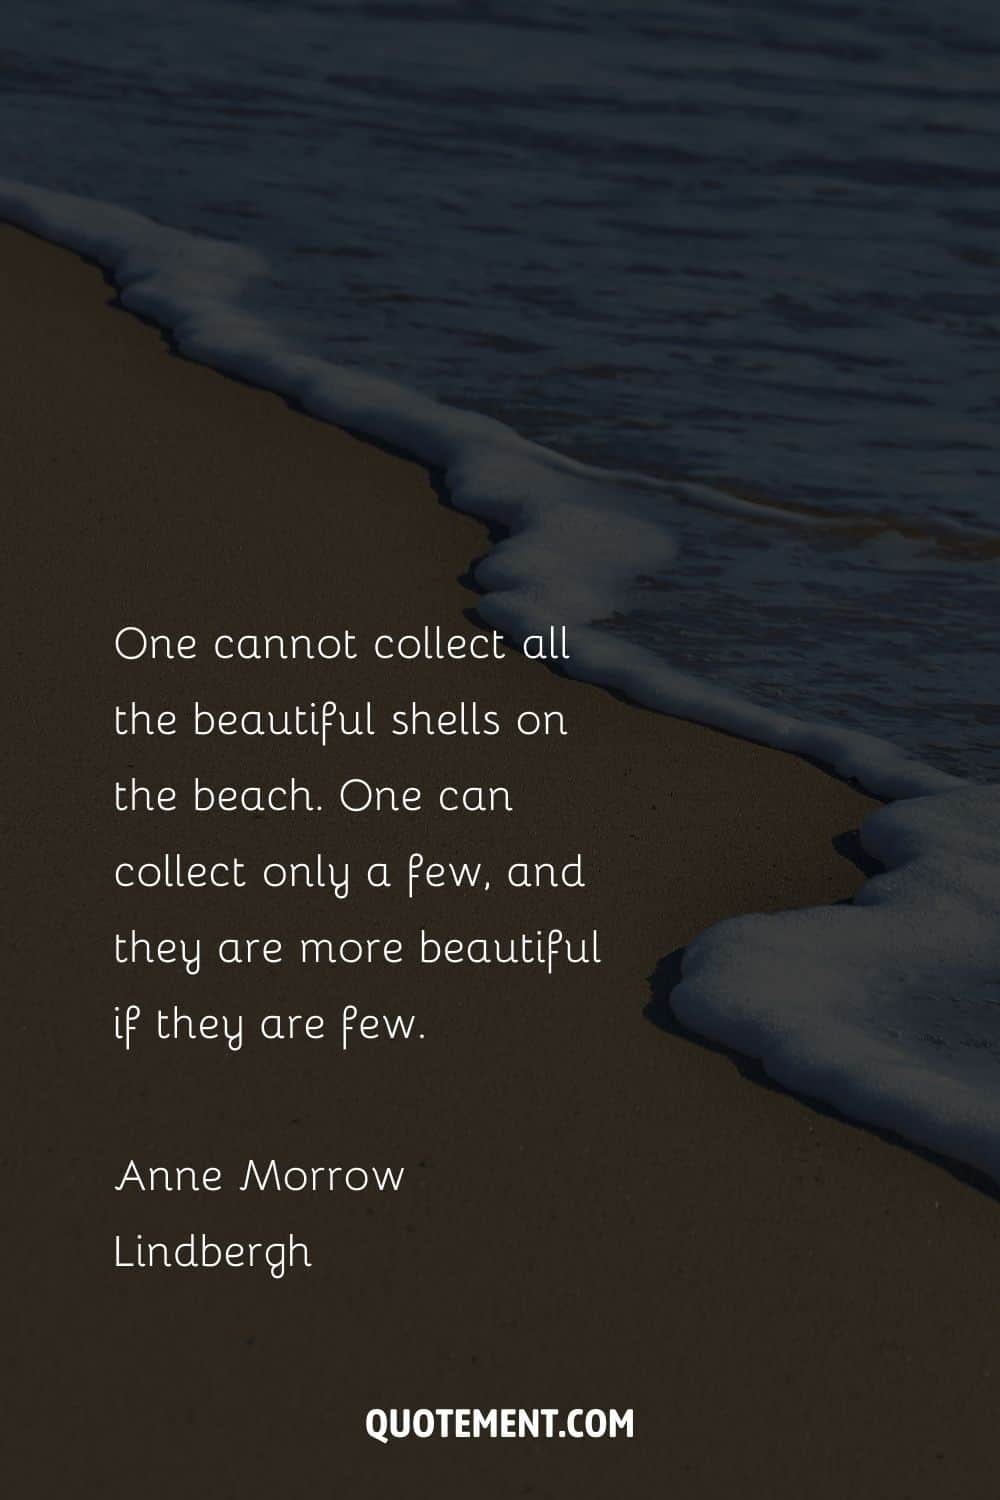 One cannot collect all the beautiful shells on the beach. One can collect only a few, and they are more beautiful if they are few. – Anne Morrow Lindbergh